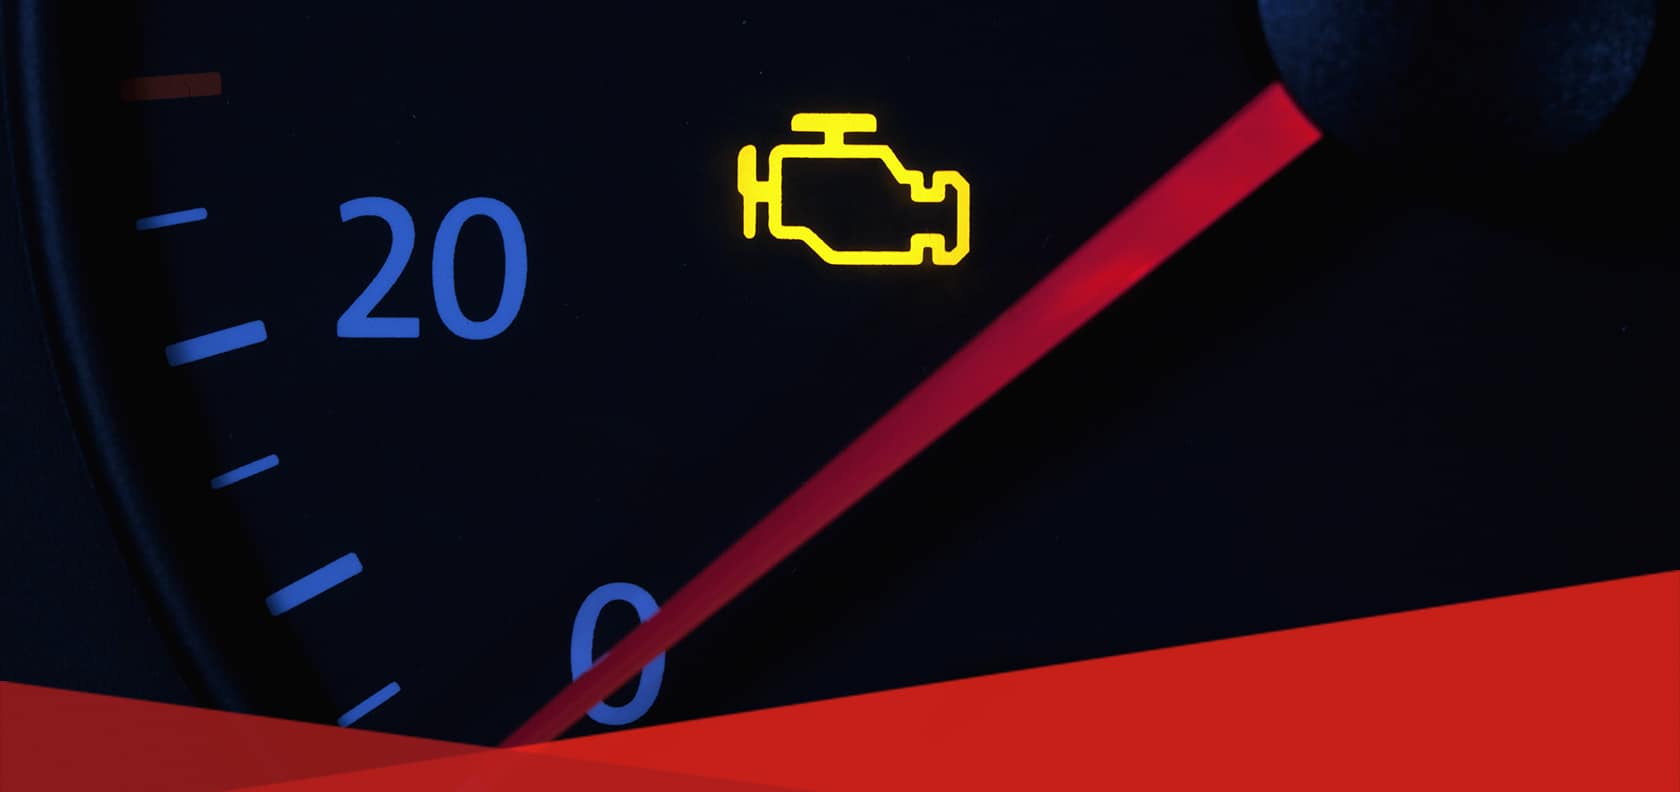 What Does the Light on the Car Dashboard Mean?